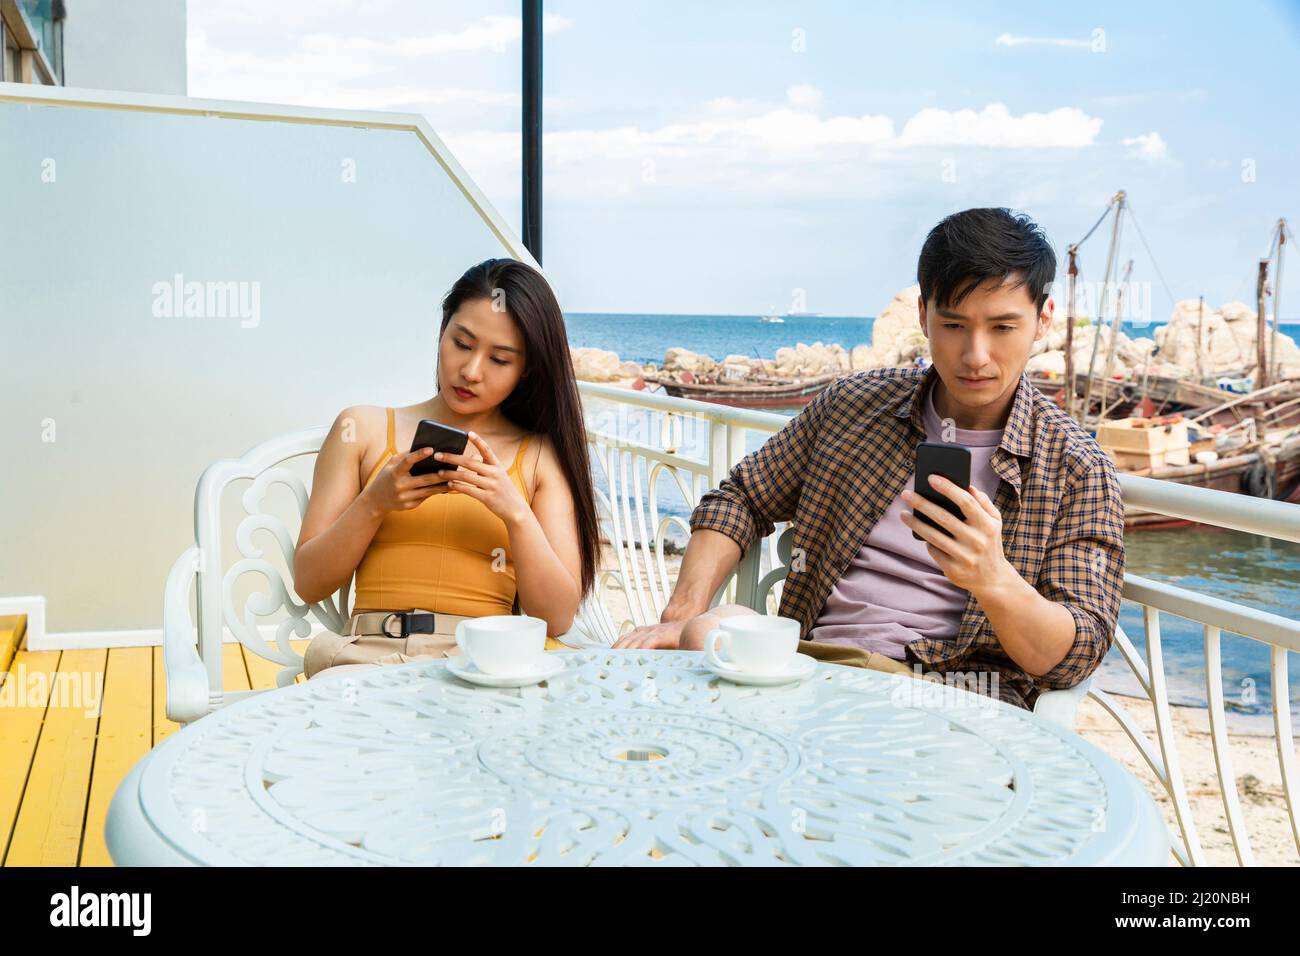 Young couple using cell phones at coastal cafe by the fish Boat pier - stock photo Stock Photo